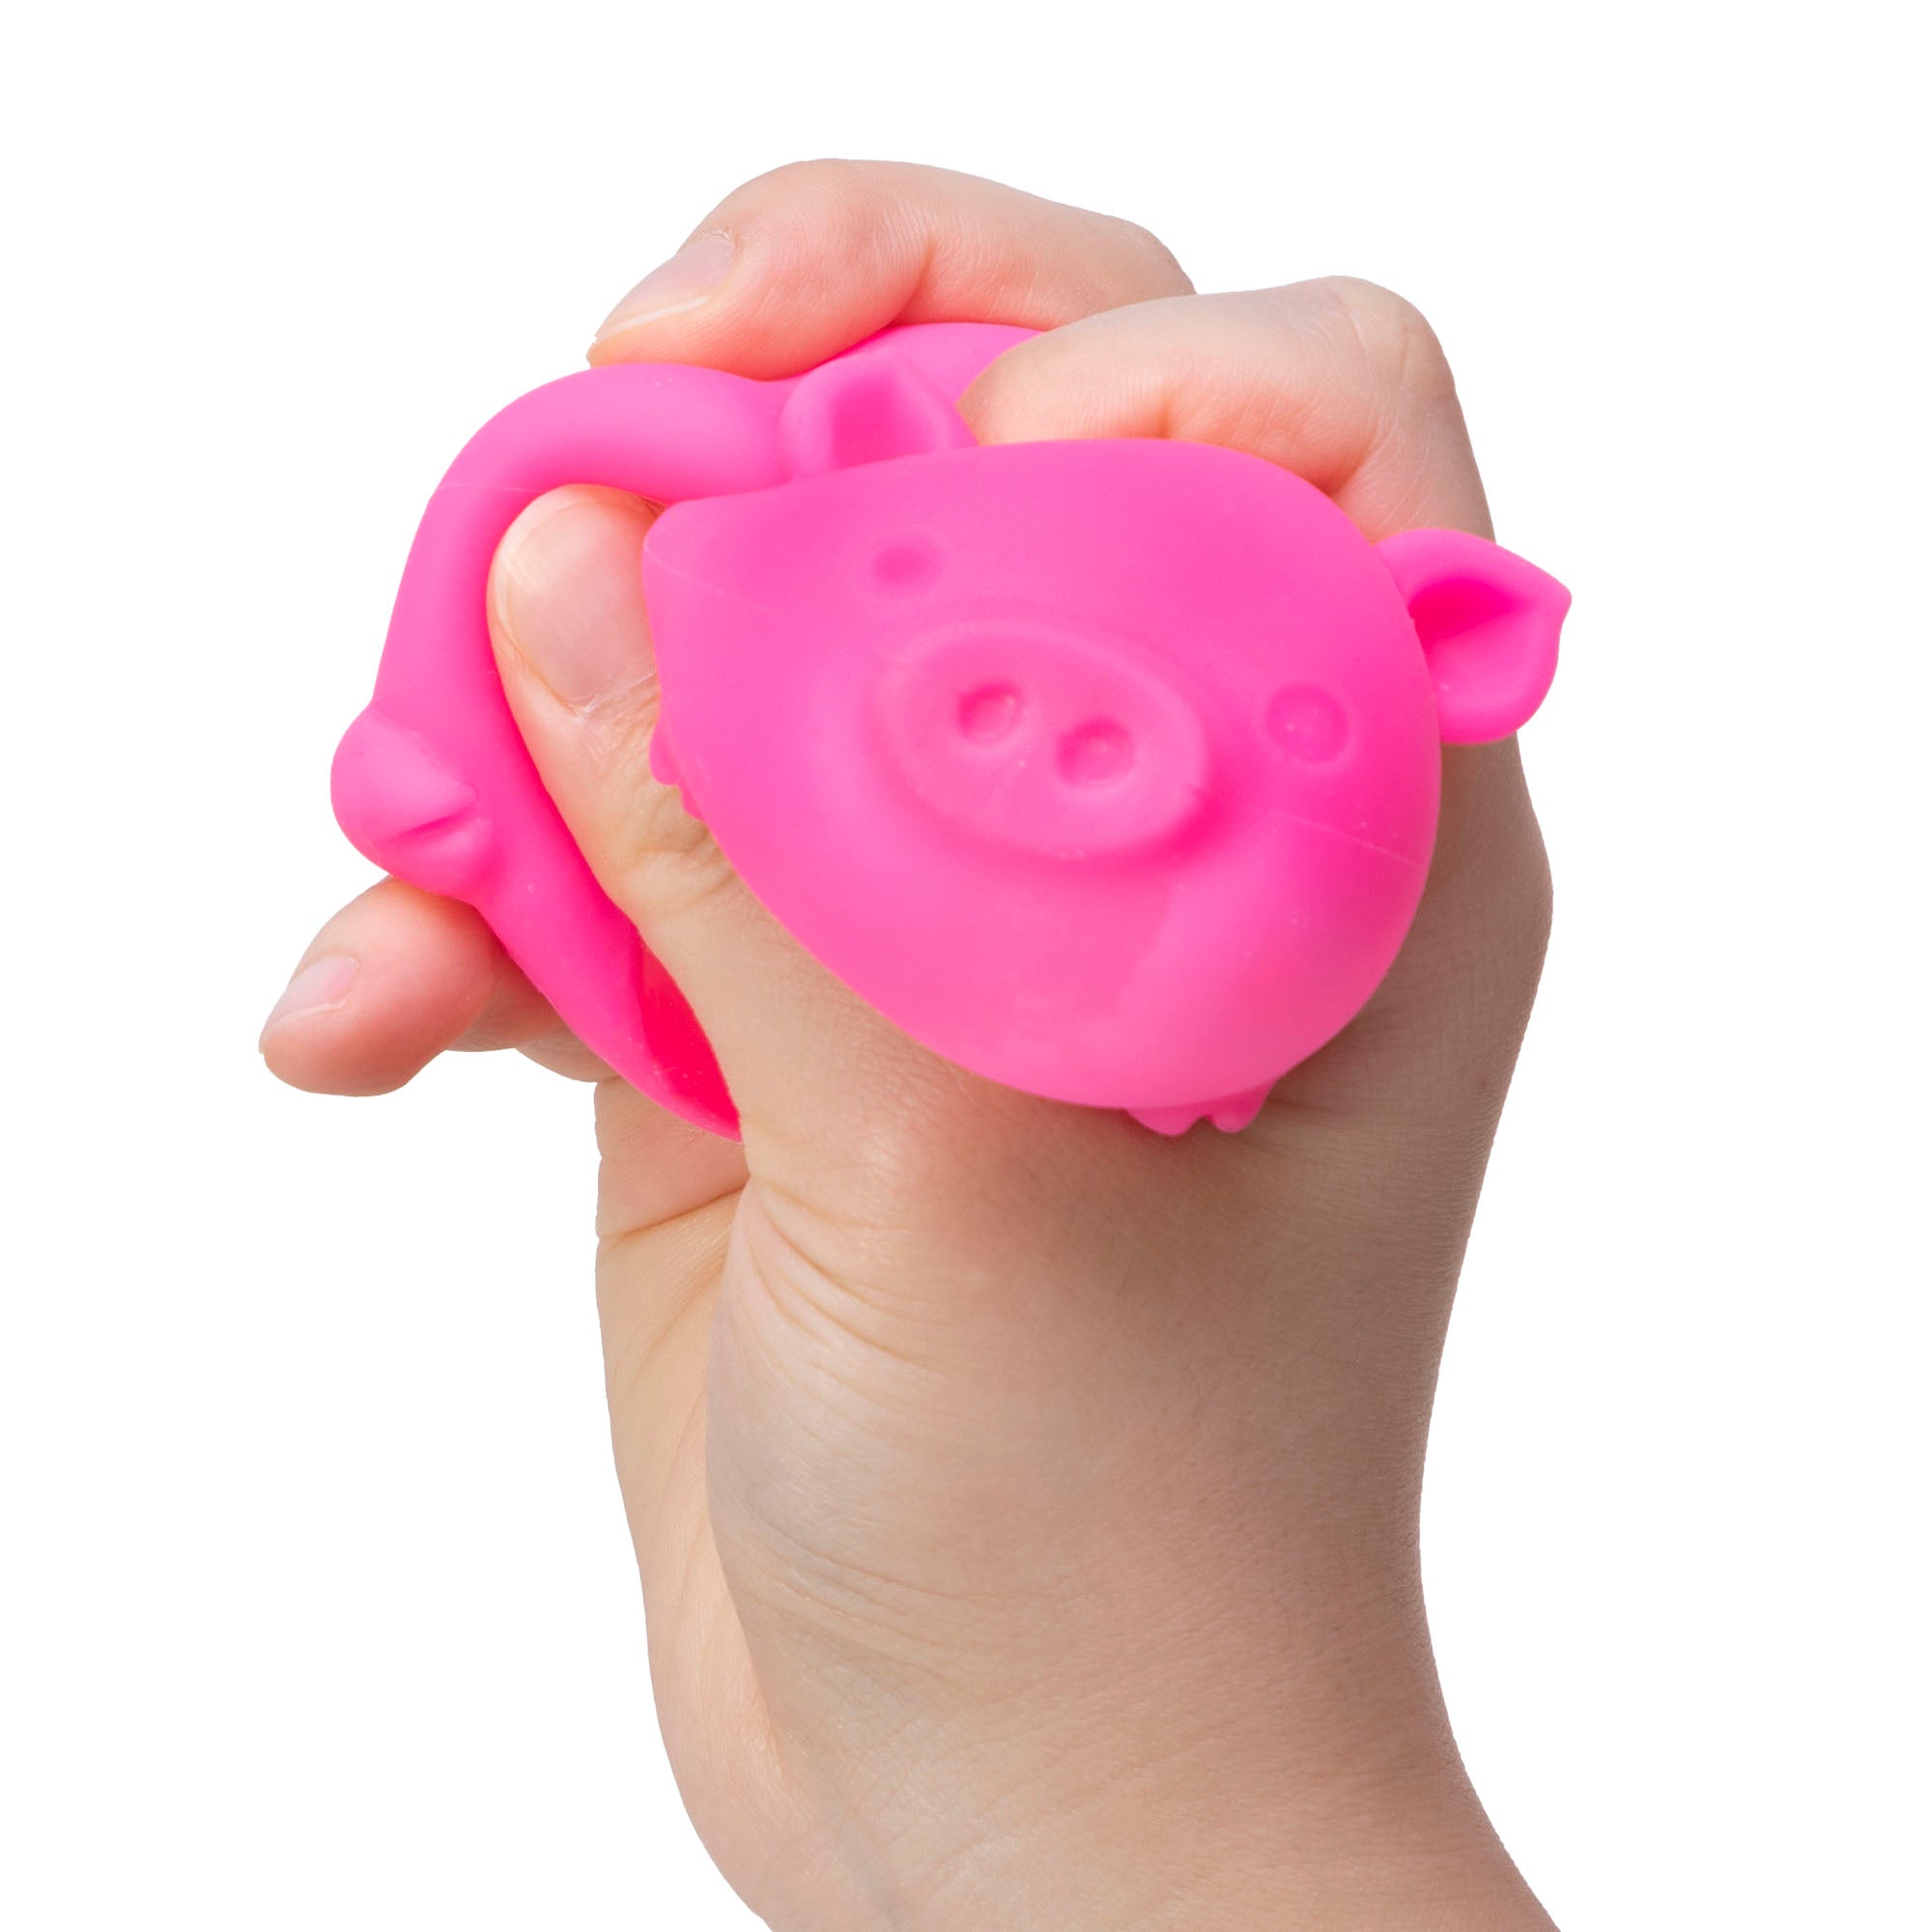 Dig It Pig Nee Doh (Assorted Styles) - Stress Ball